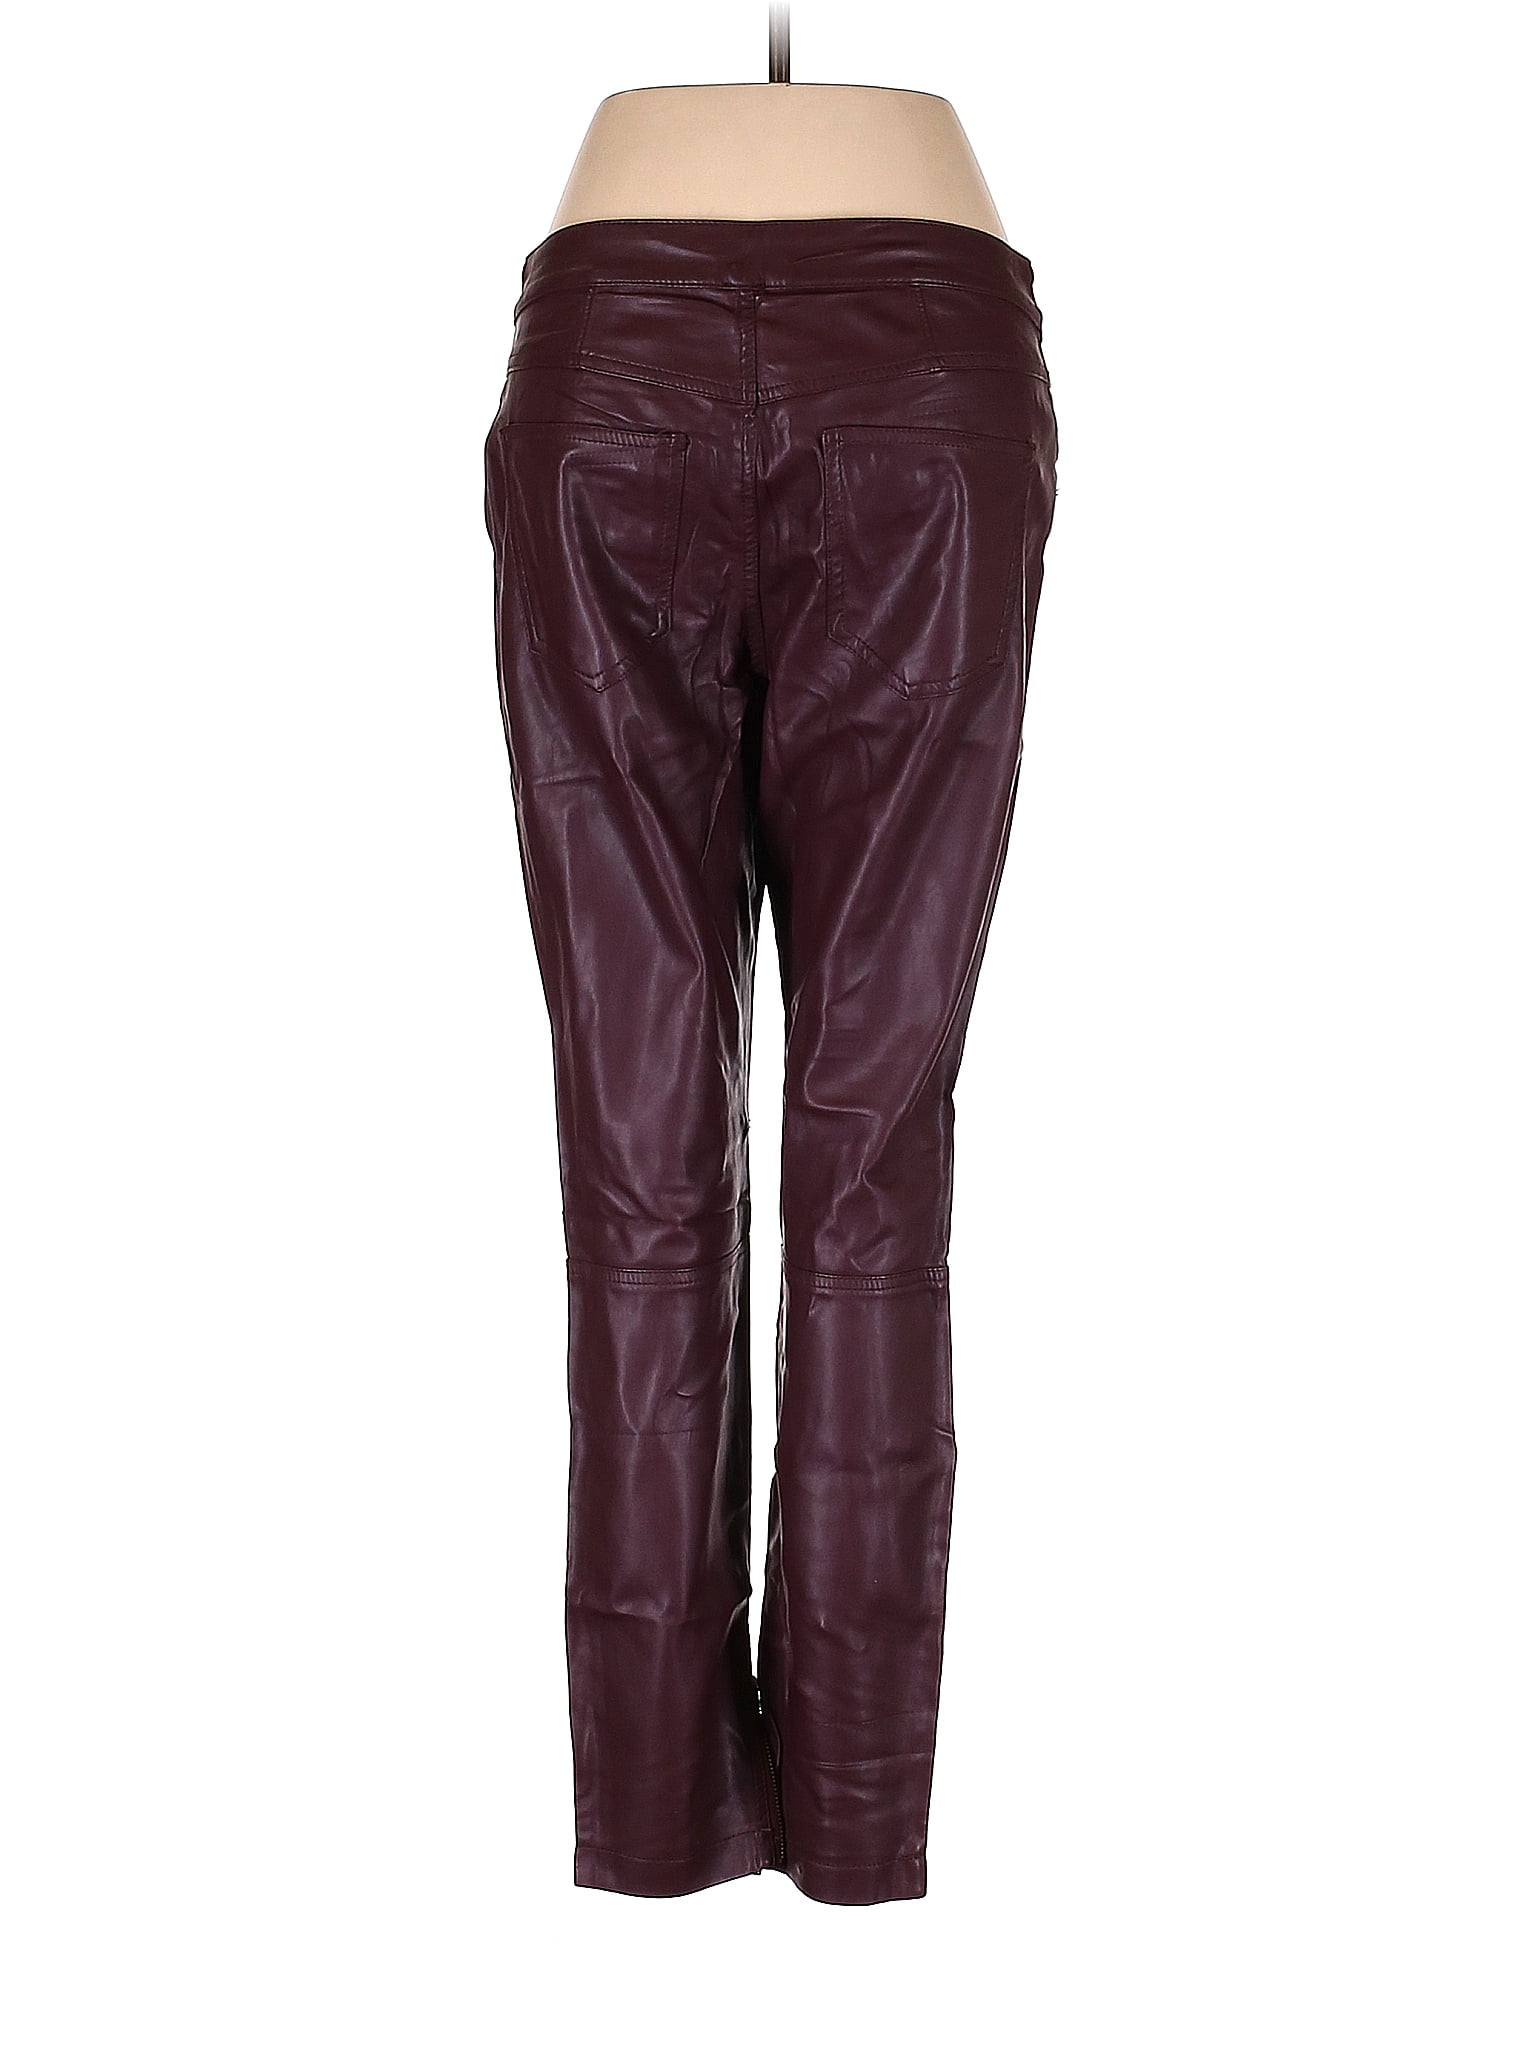 ootn ♥️ how fun are these burgundy wine leather pants from @Free Peopl